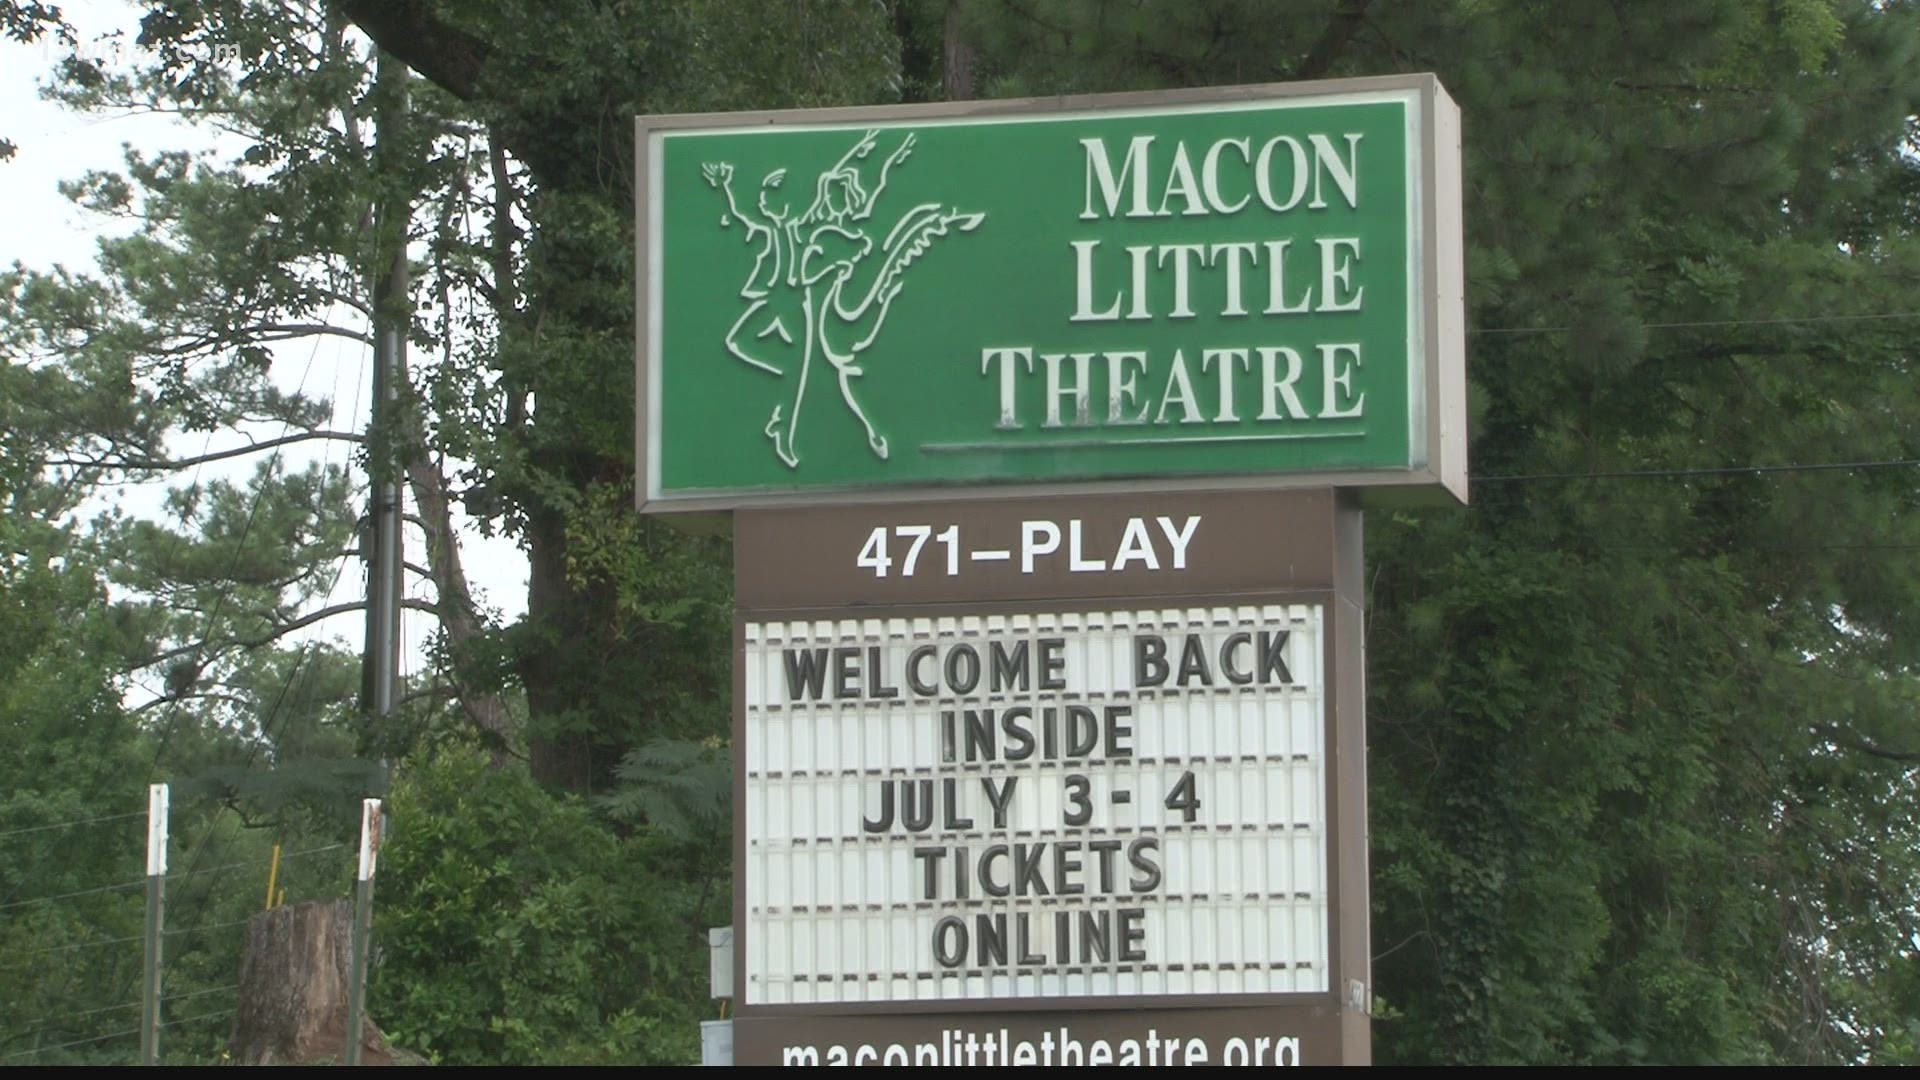 After a 16-month break, the Macon Little Theatre will be hosting its first production back in the building on Saturday and Sunday.